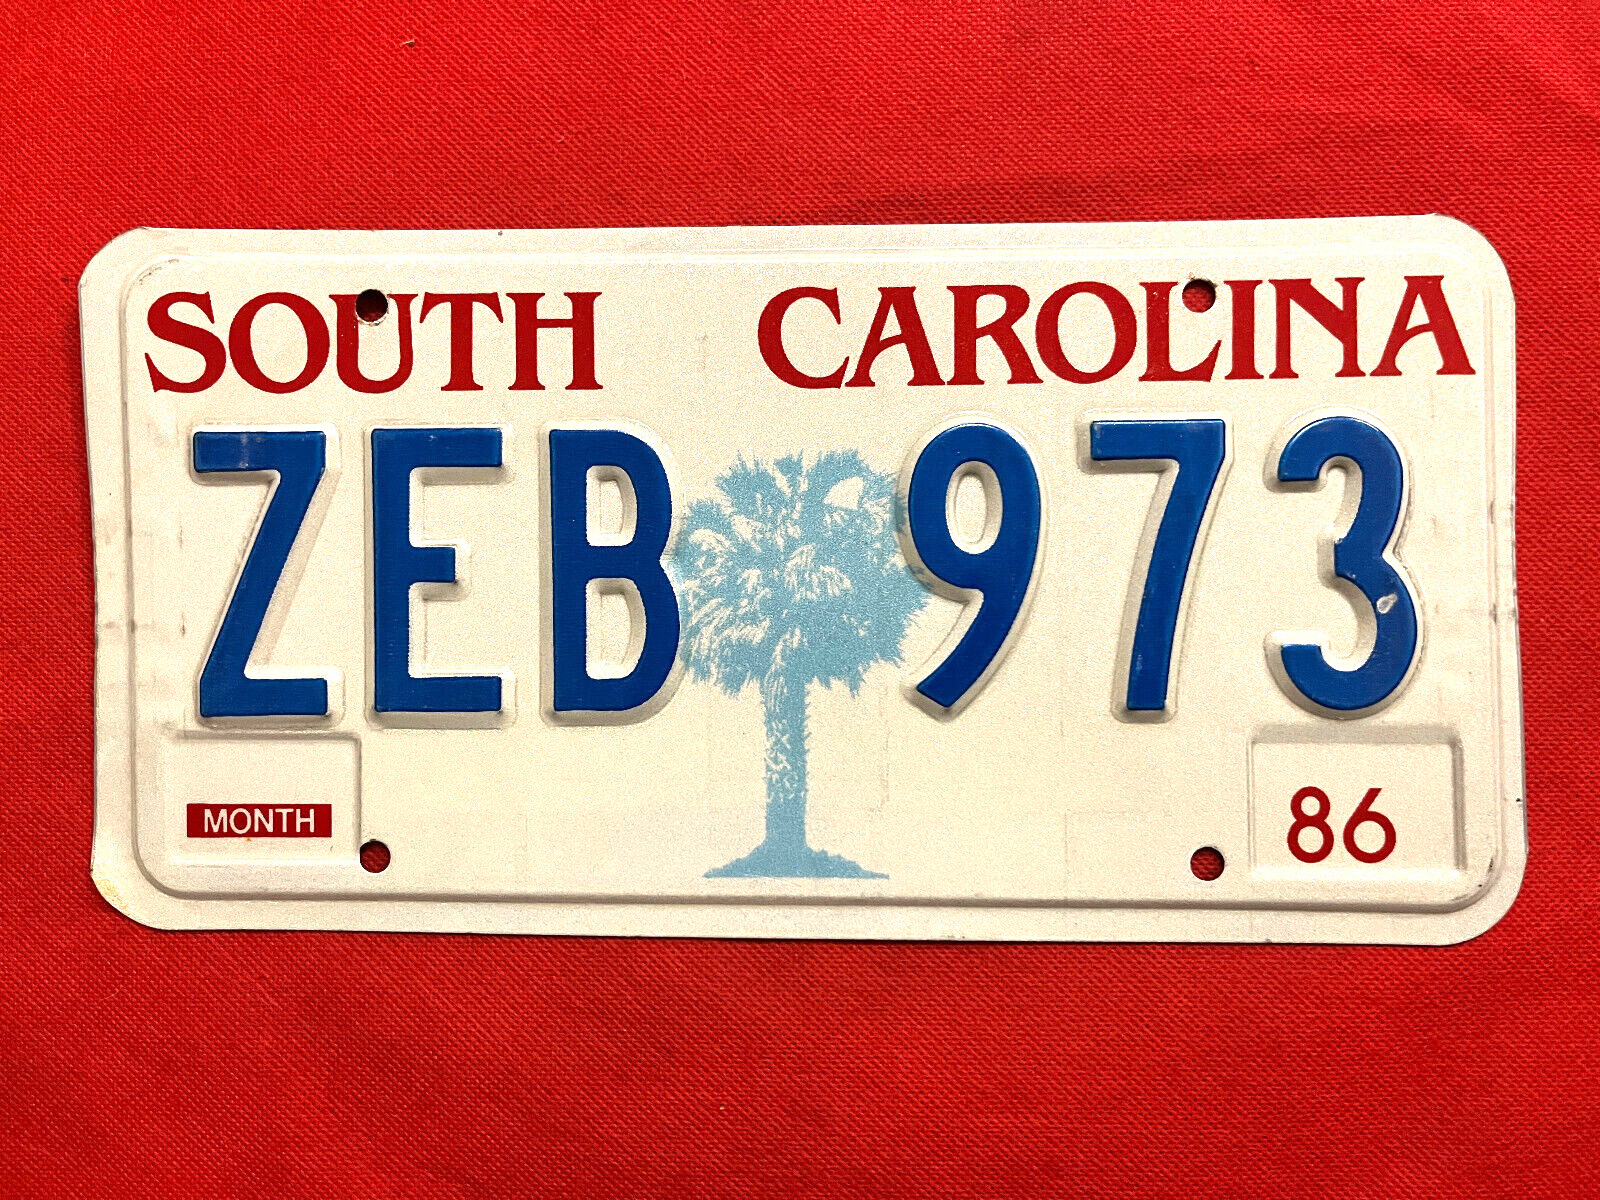 South Carolina License Plate ZEB 973 / Crafts / Collect / Specialty / Expired